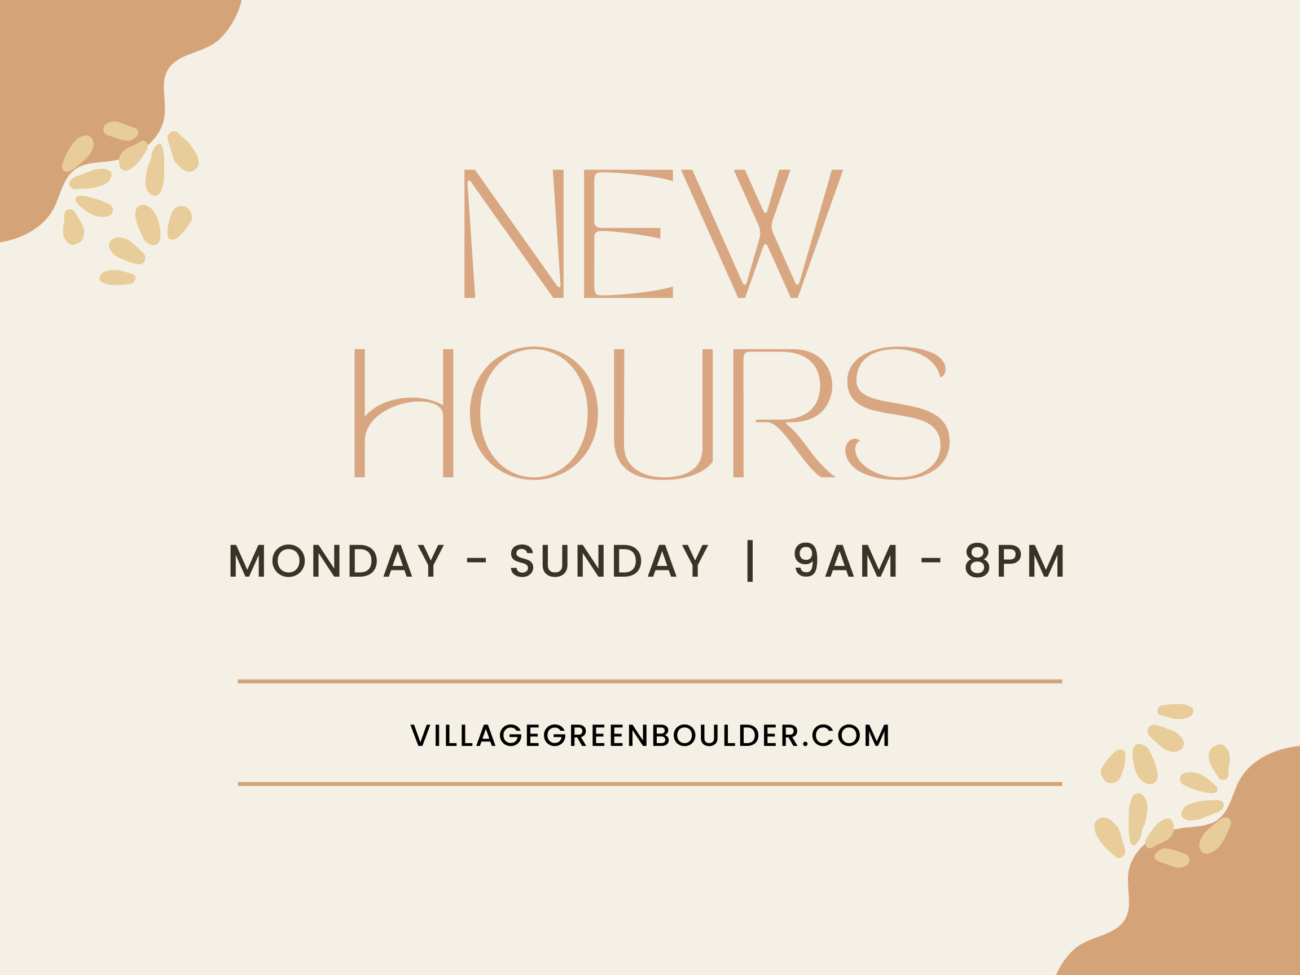 Starting Monday 1/16, we are closing at 8pm everyday!! Make sure to stock up on goodies before 8pm!